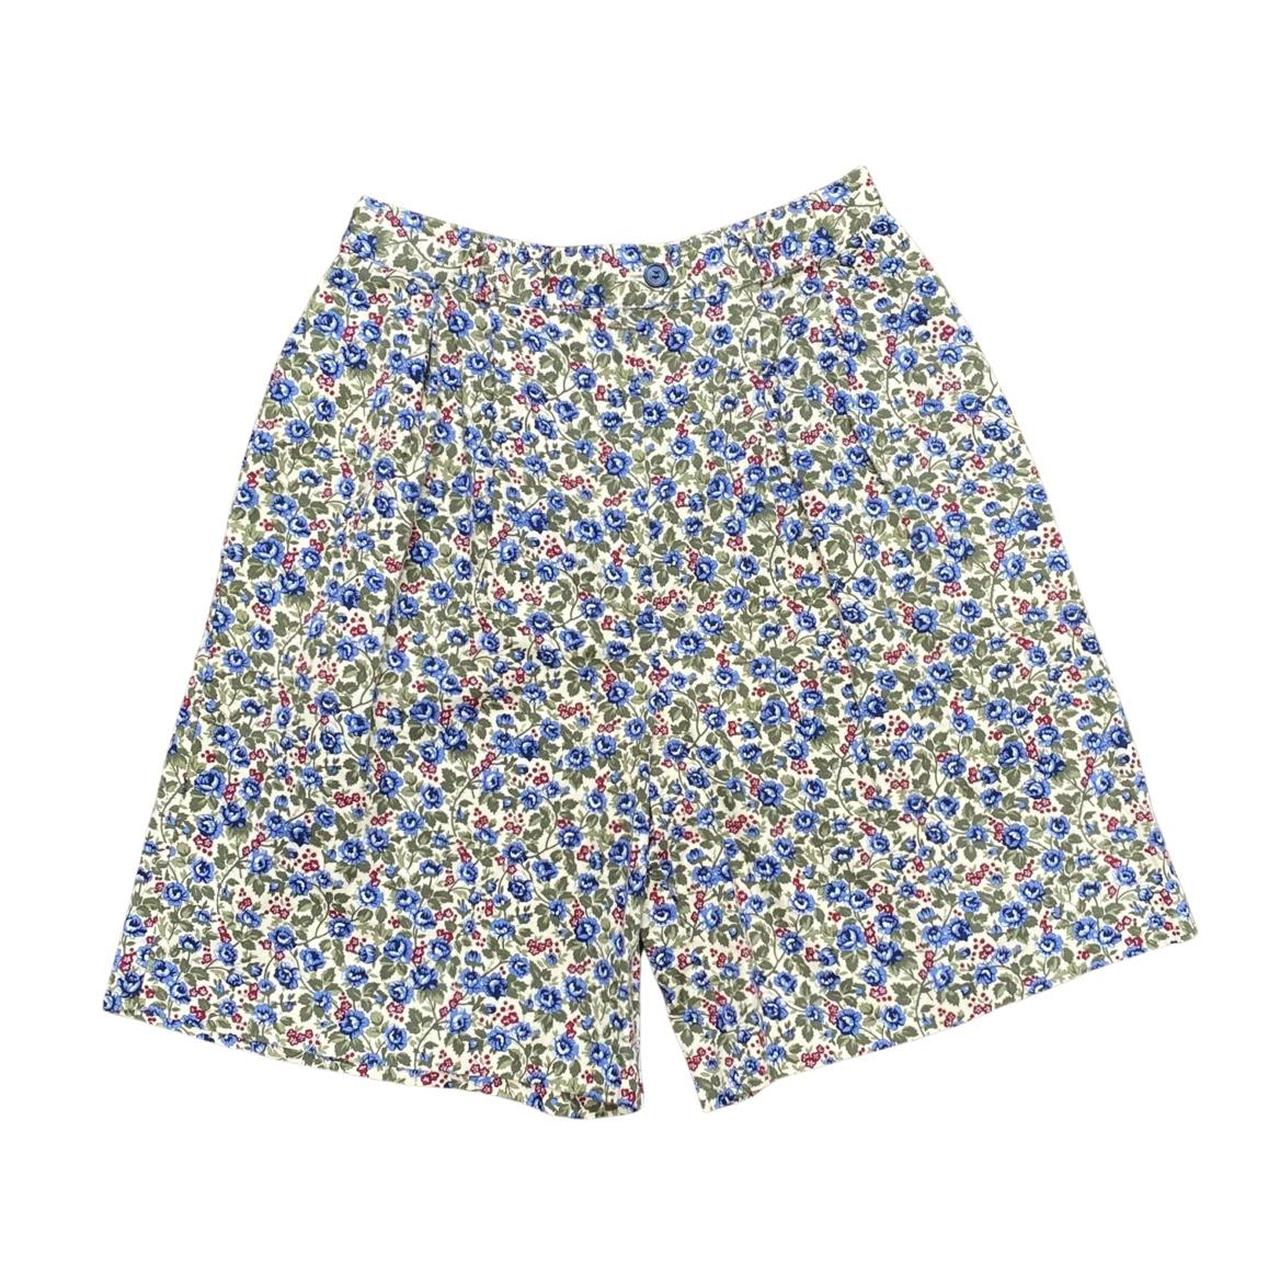 Patterned Cotton Shorts - Yellow/leopard print - Ladies